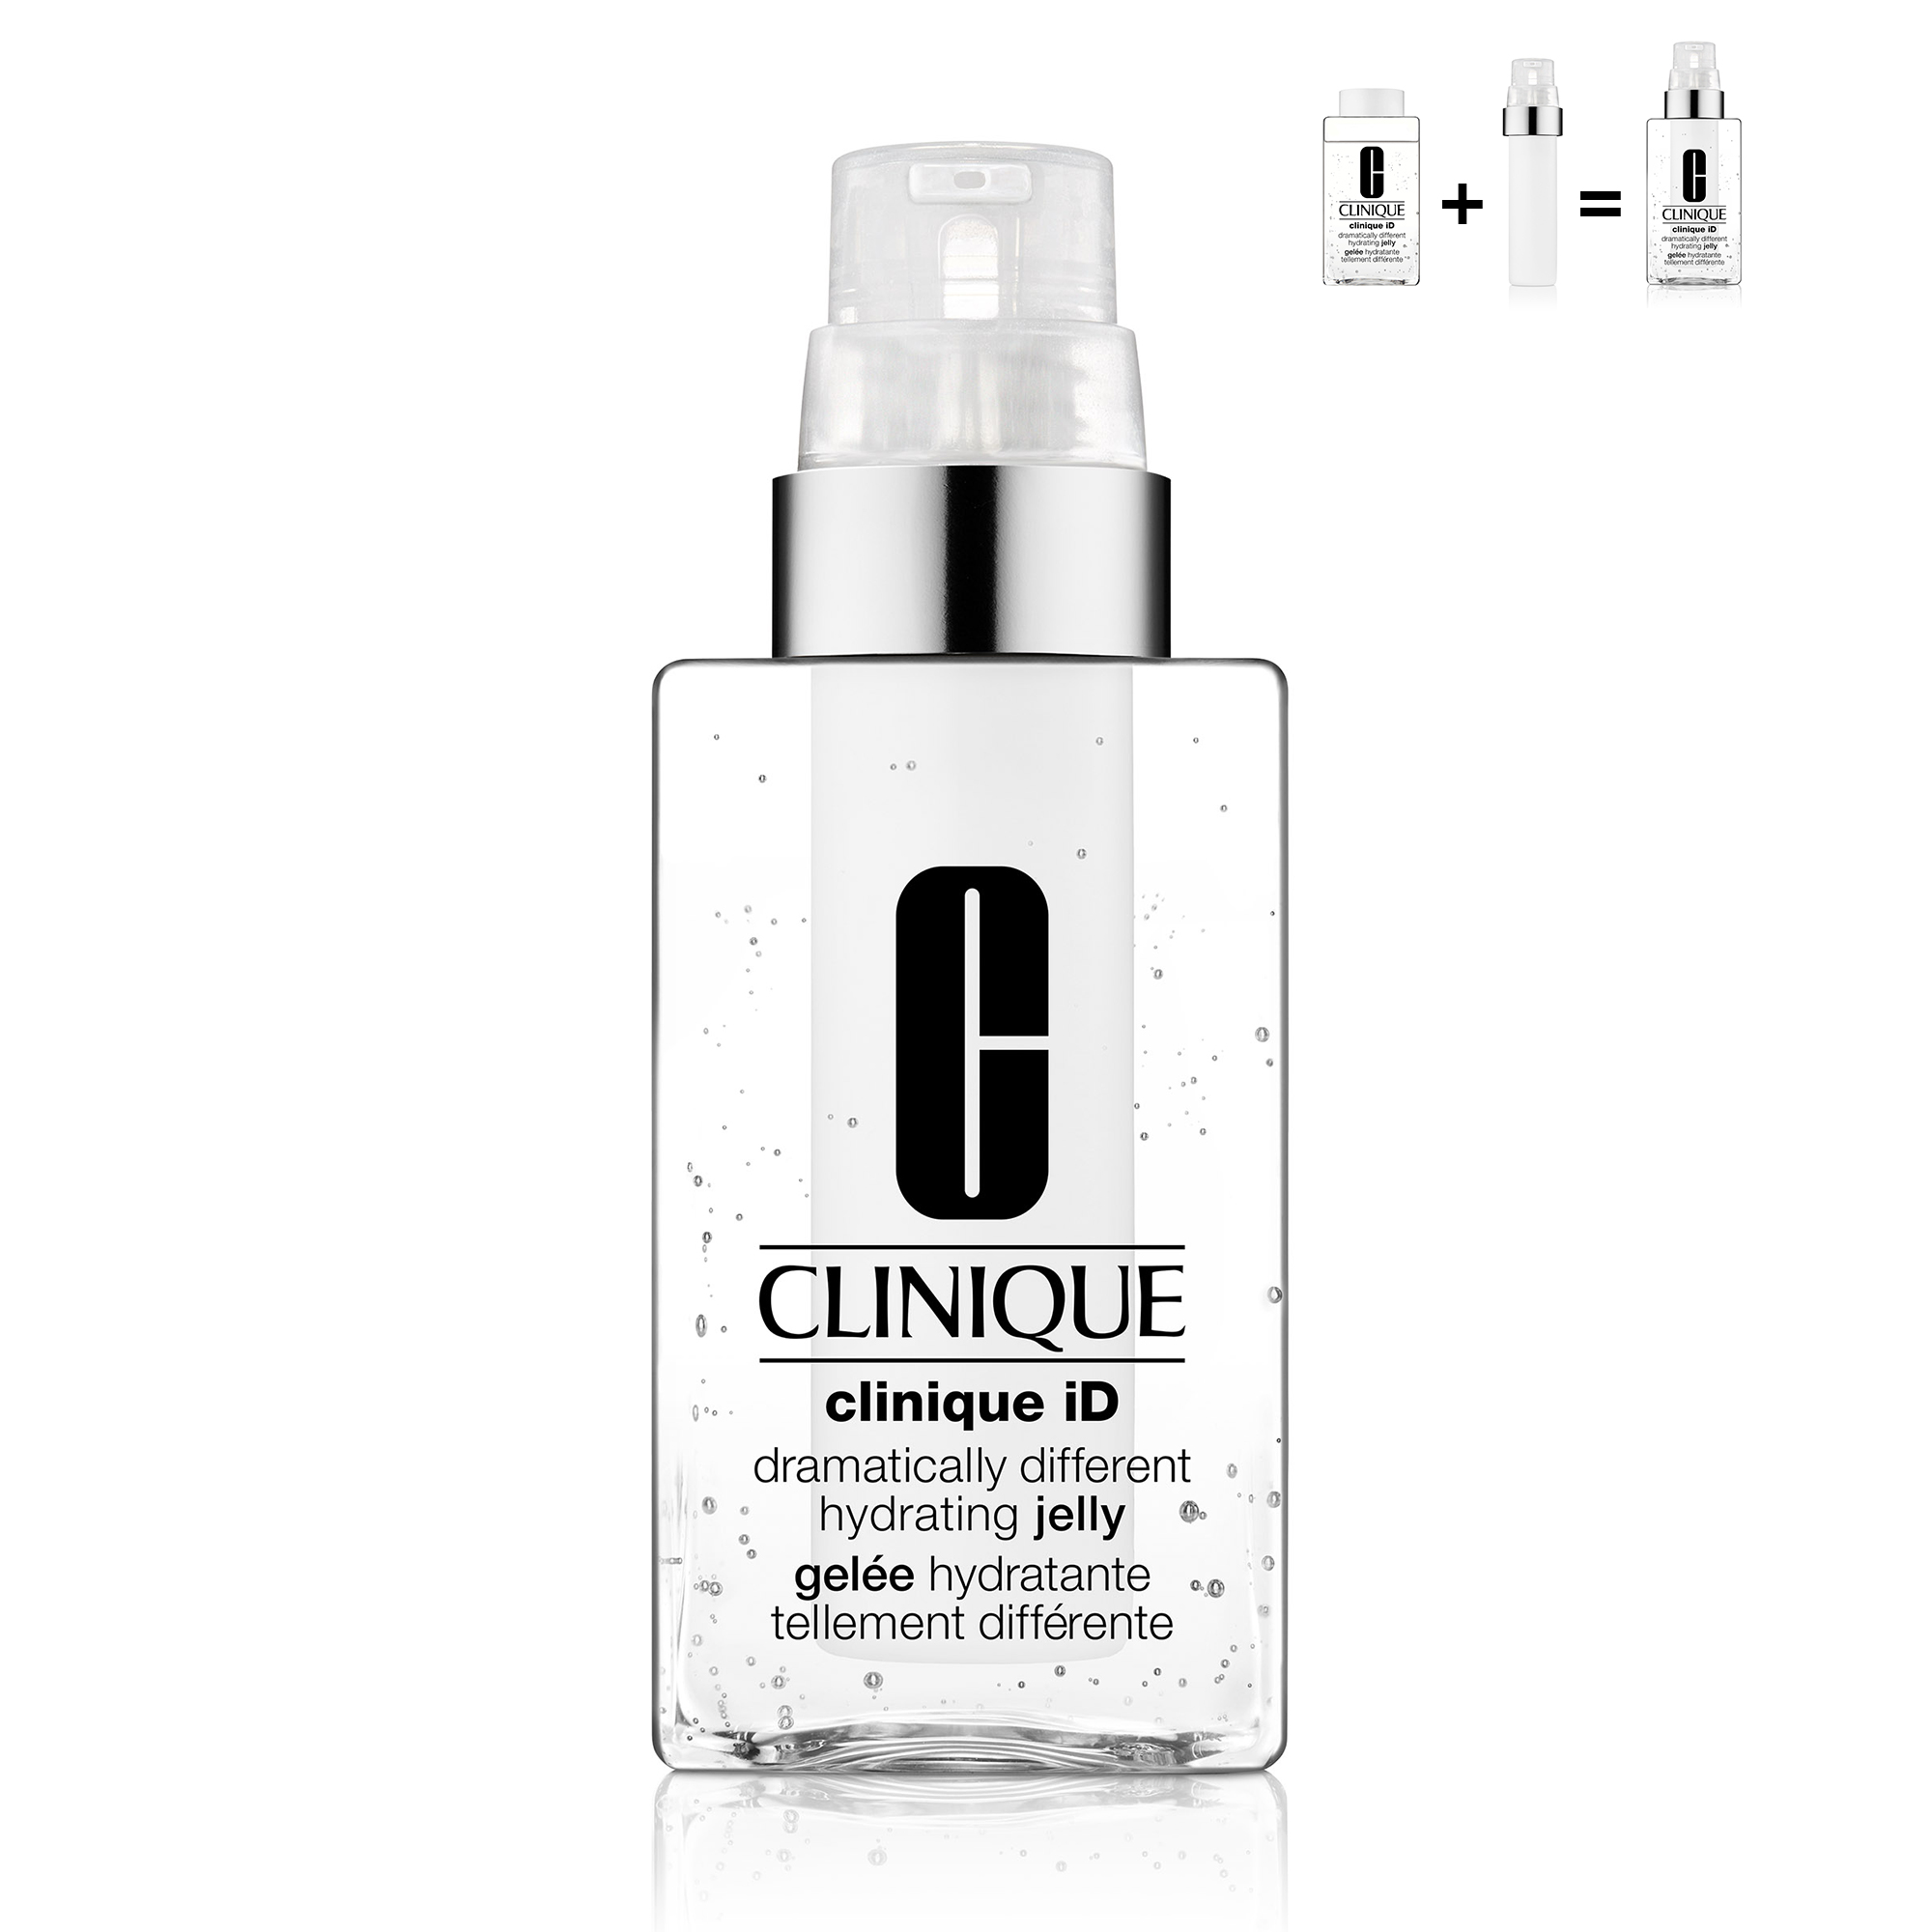 Clinique Id Acc Serum Uneven Skin Tone And Base Dd Hydrating Jelly Moisturizer